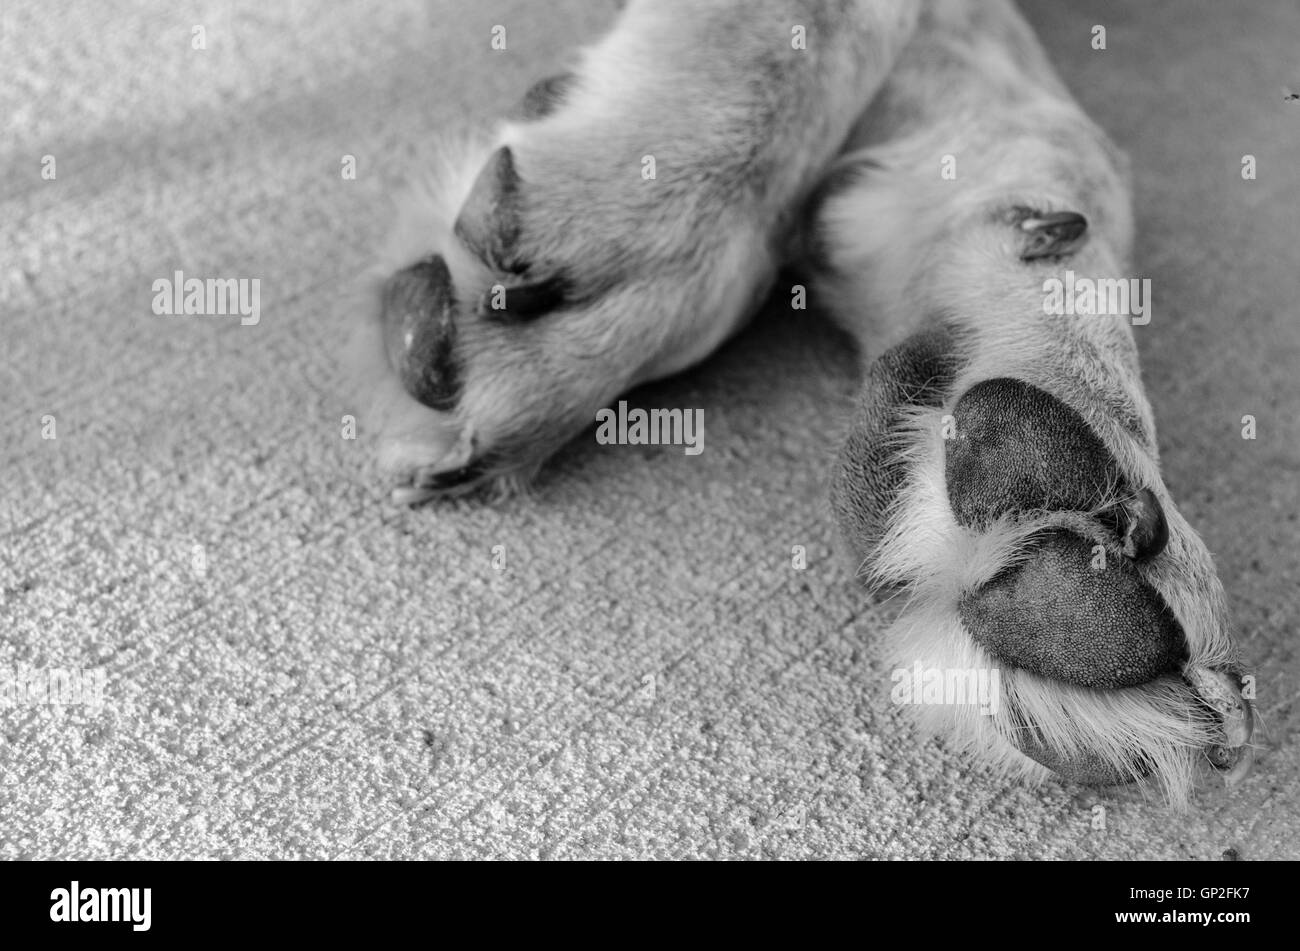 Dog's paws relaxed on the concrete. Stock Photo